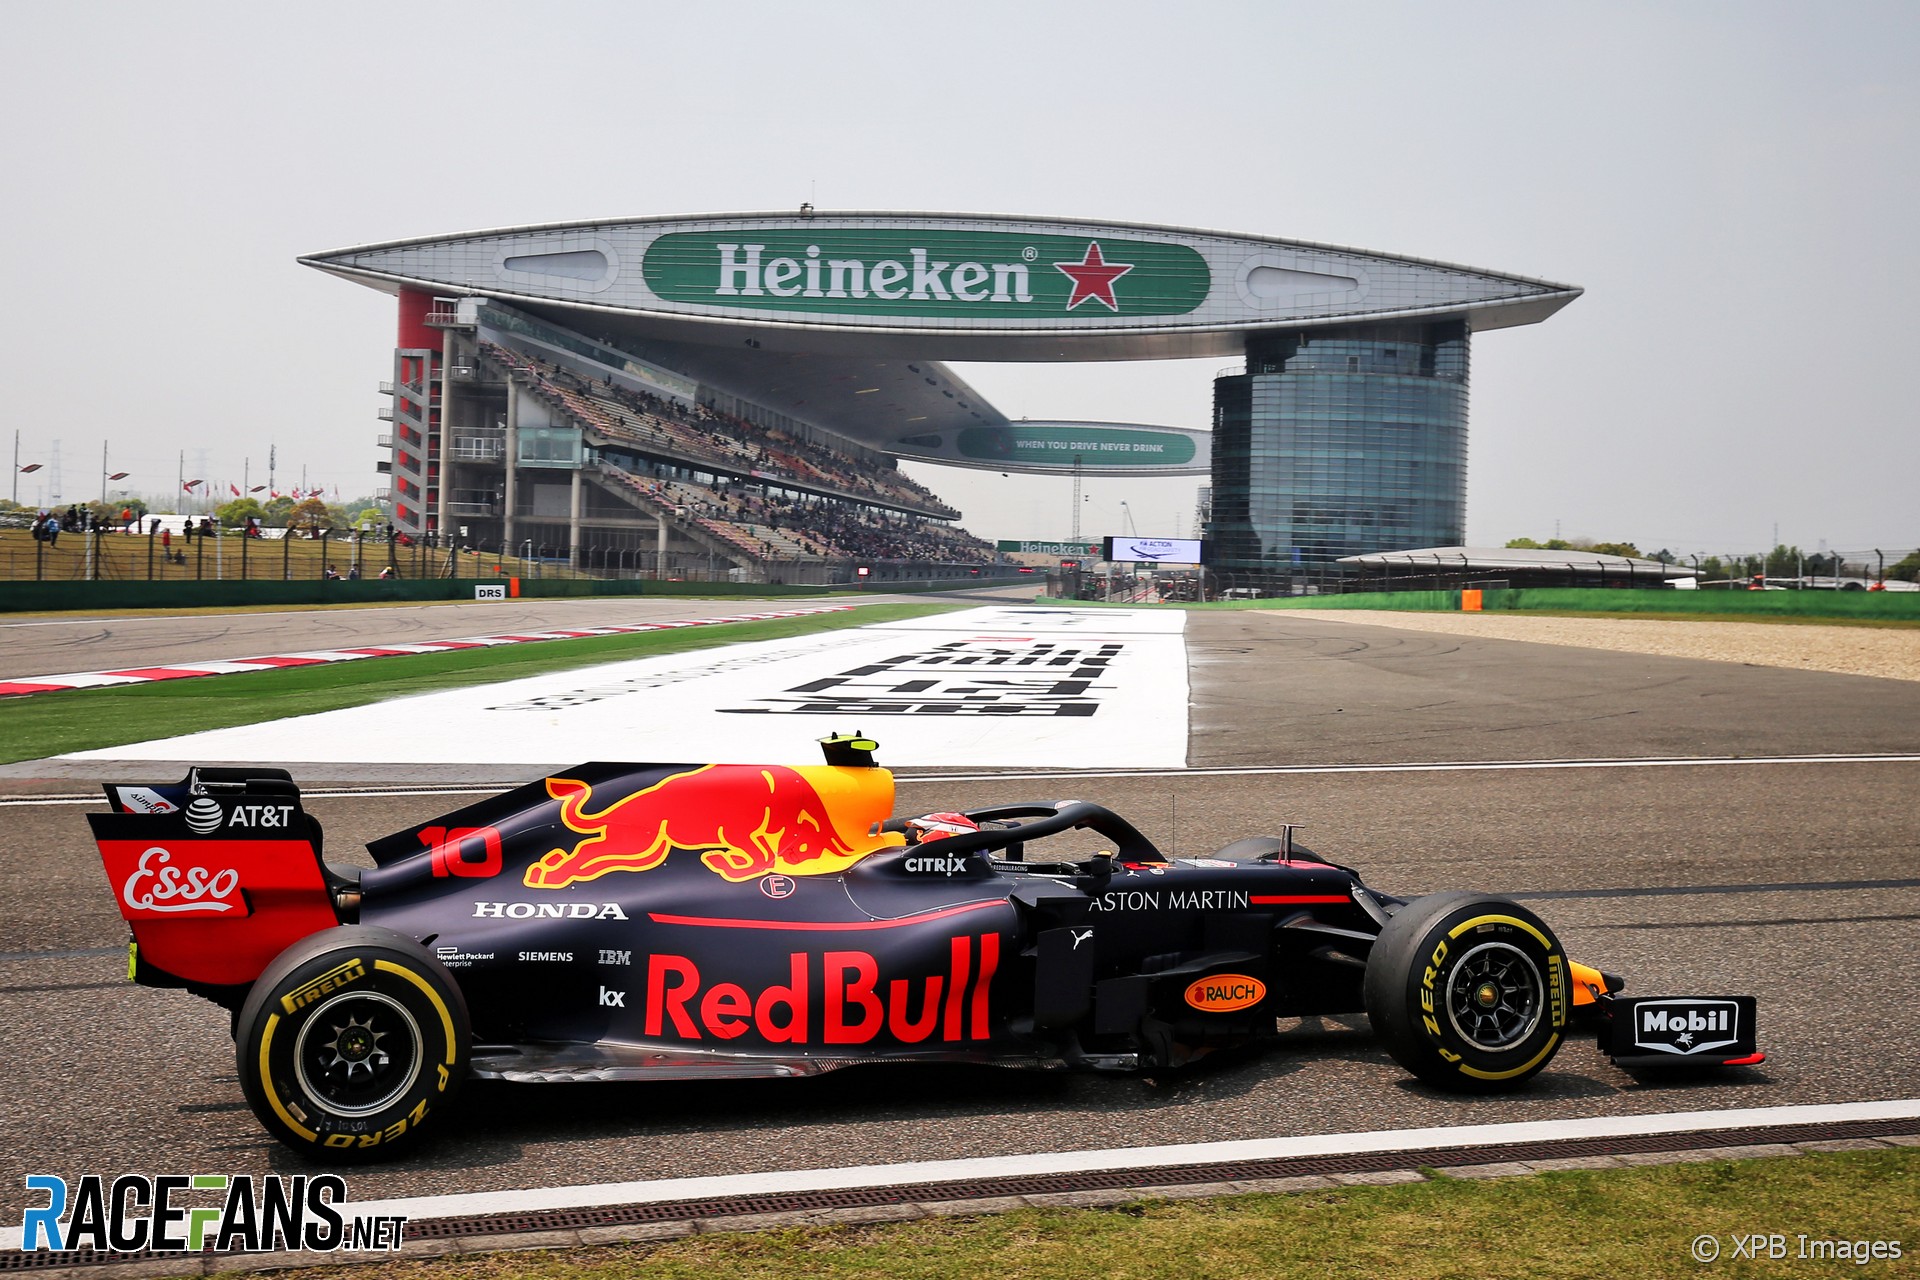 mosaic large come 2019 Chinese F1 Grand Prix Friday practice analysis | RaceFans